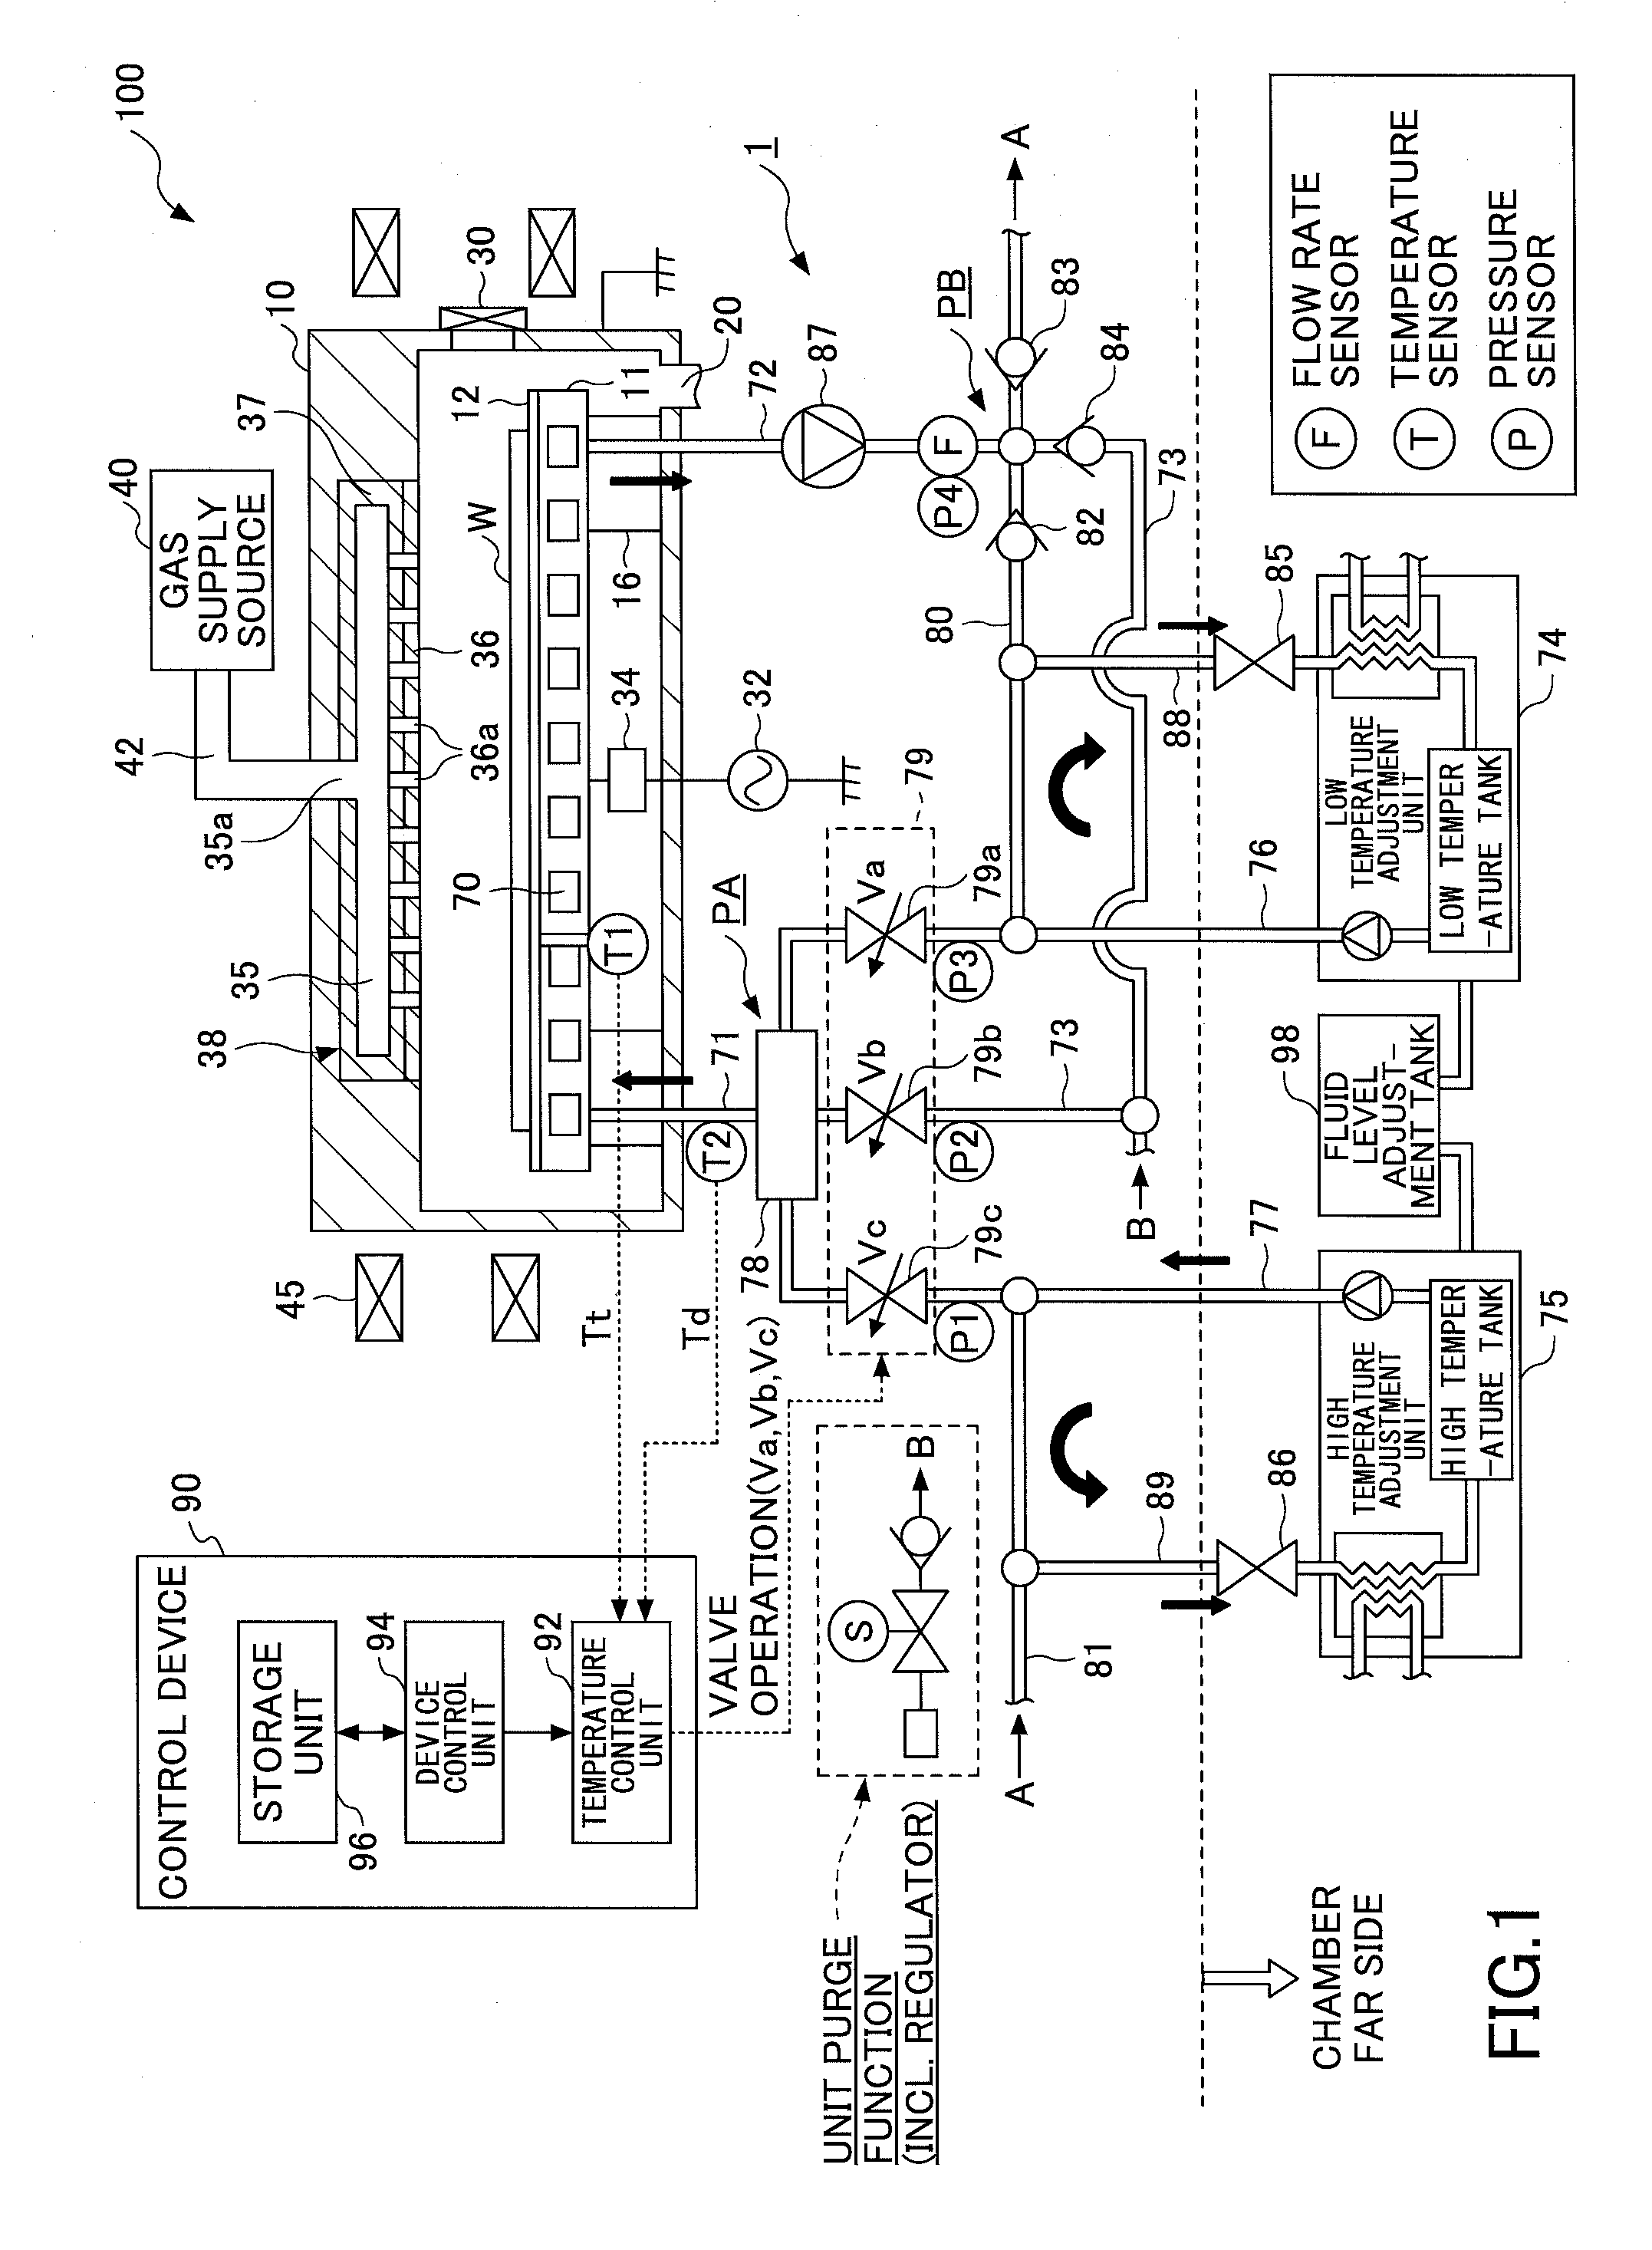 Temperature control system, semiconductor manufacturing device, and temperature control method